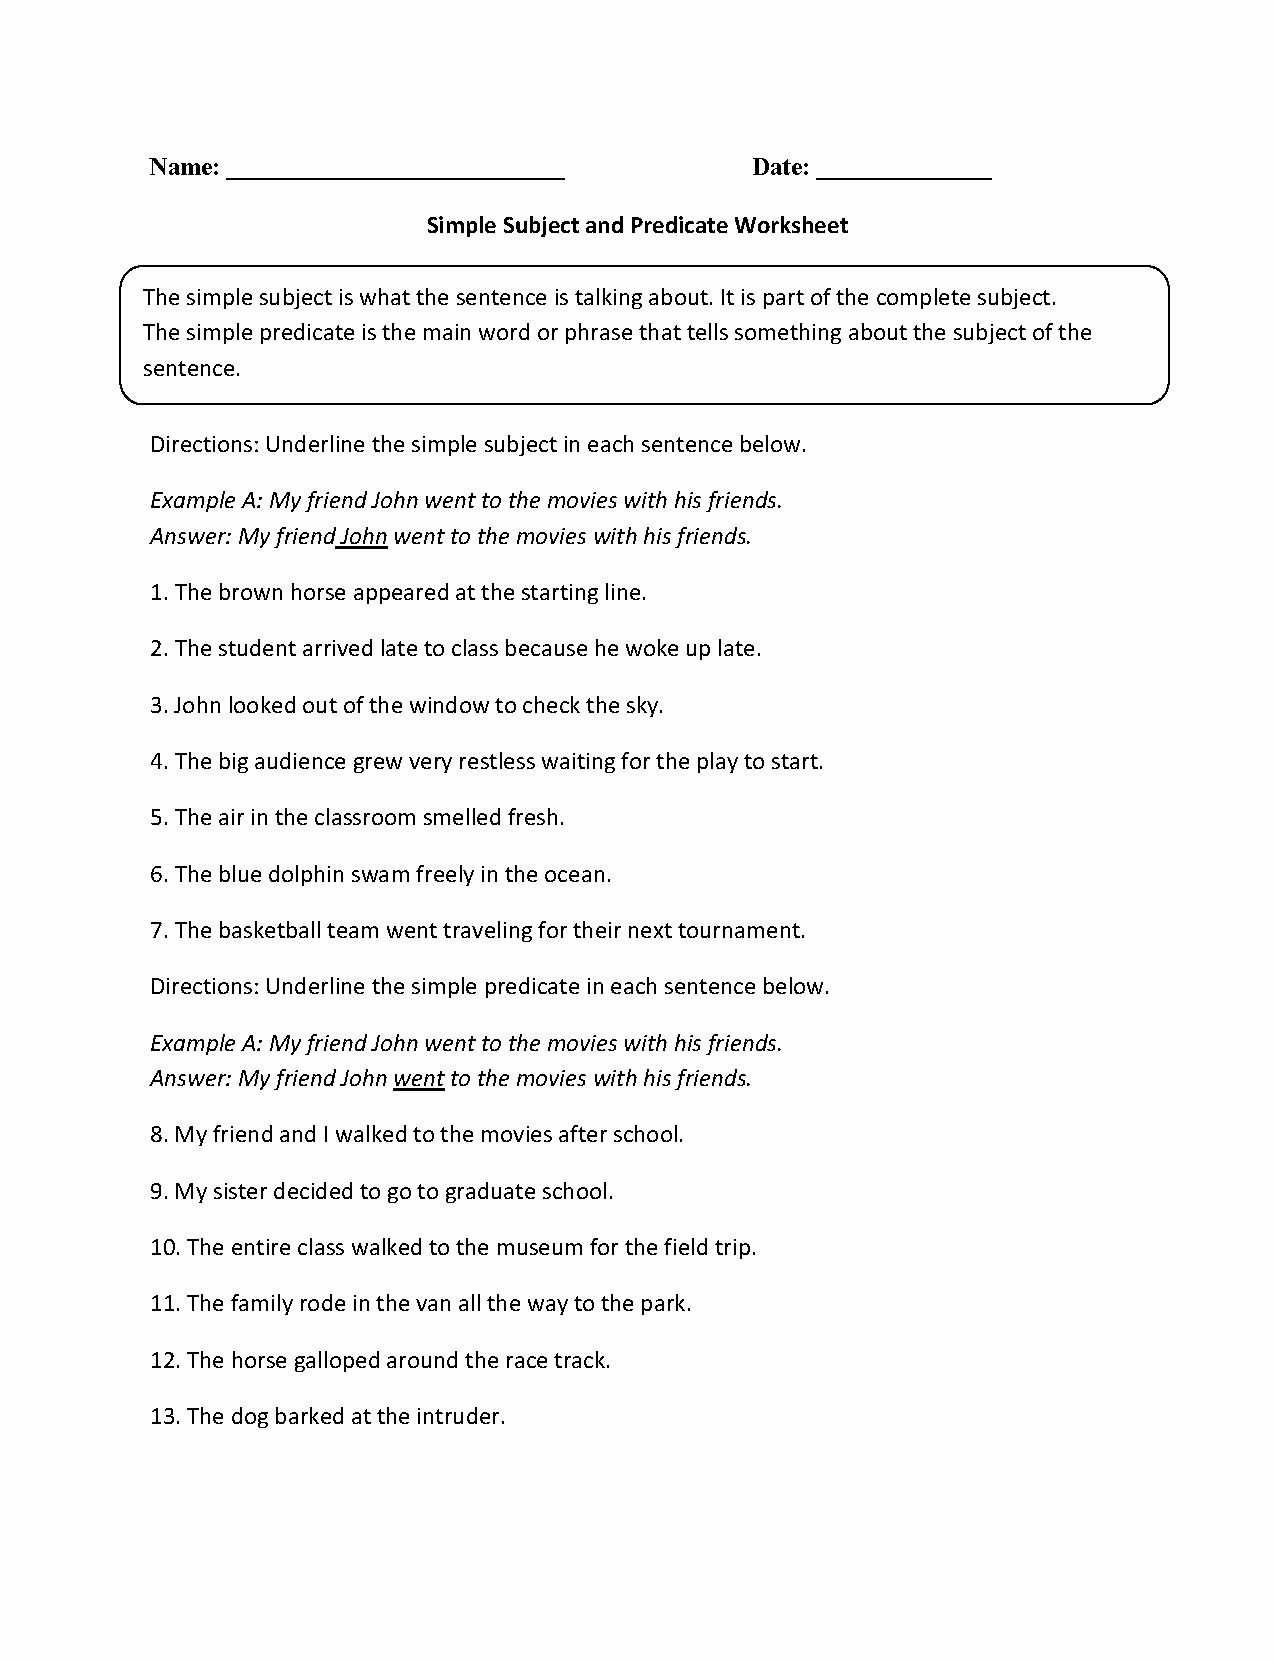 Subjects and Predicates Worksheet Unique Simple Subject and Predicate Worksheet